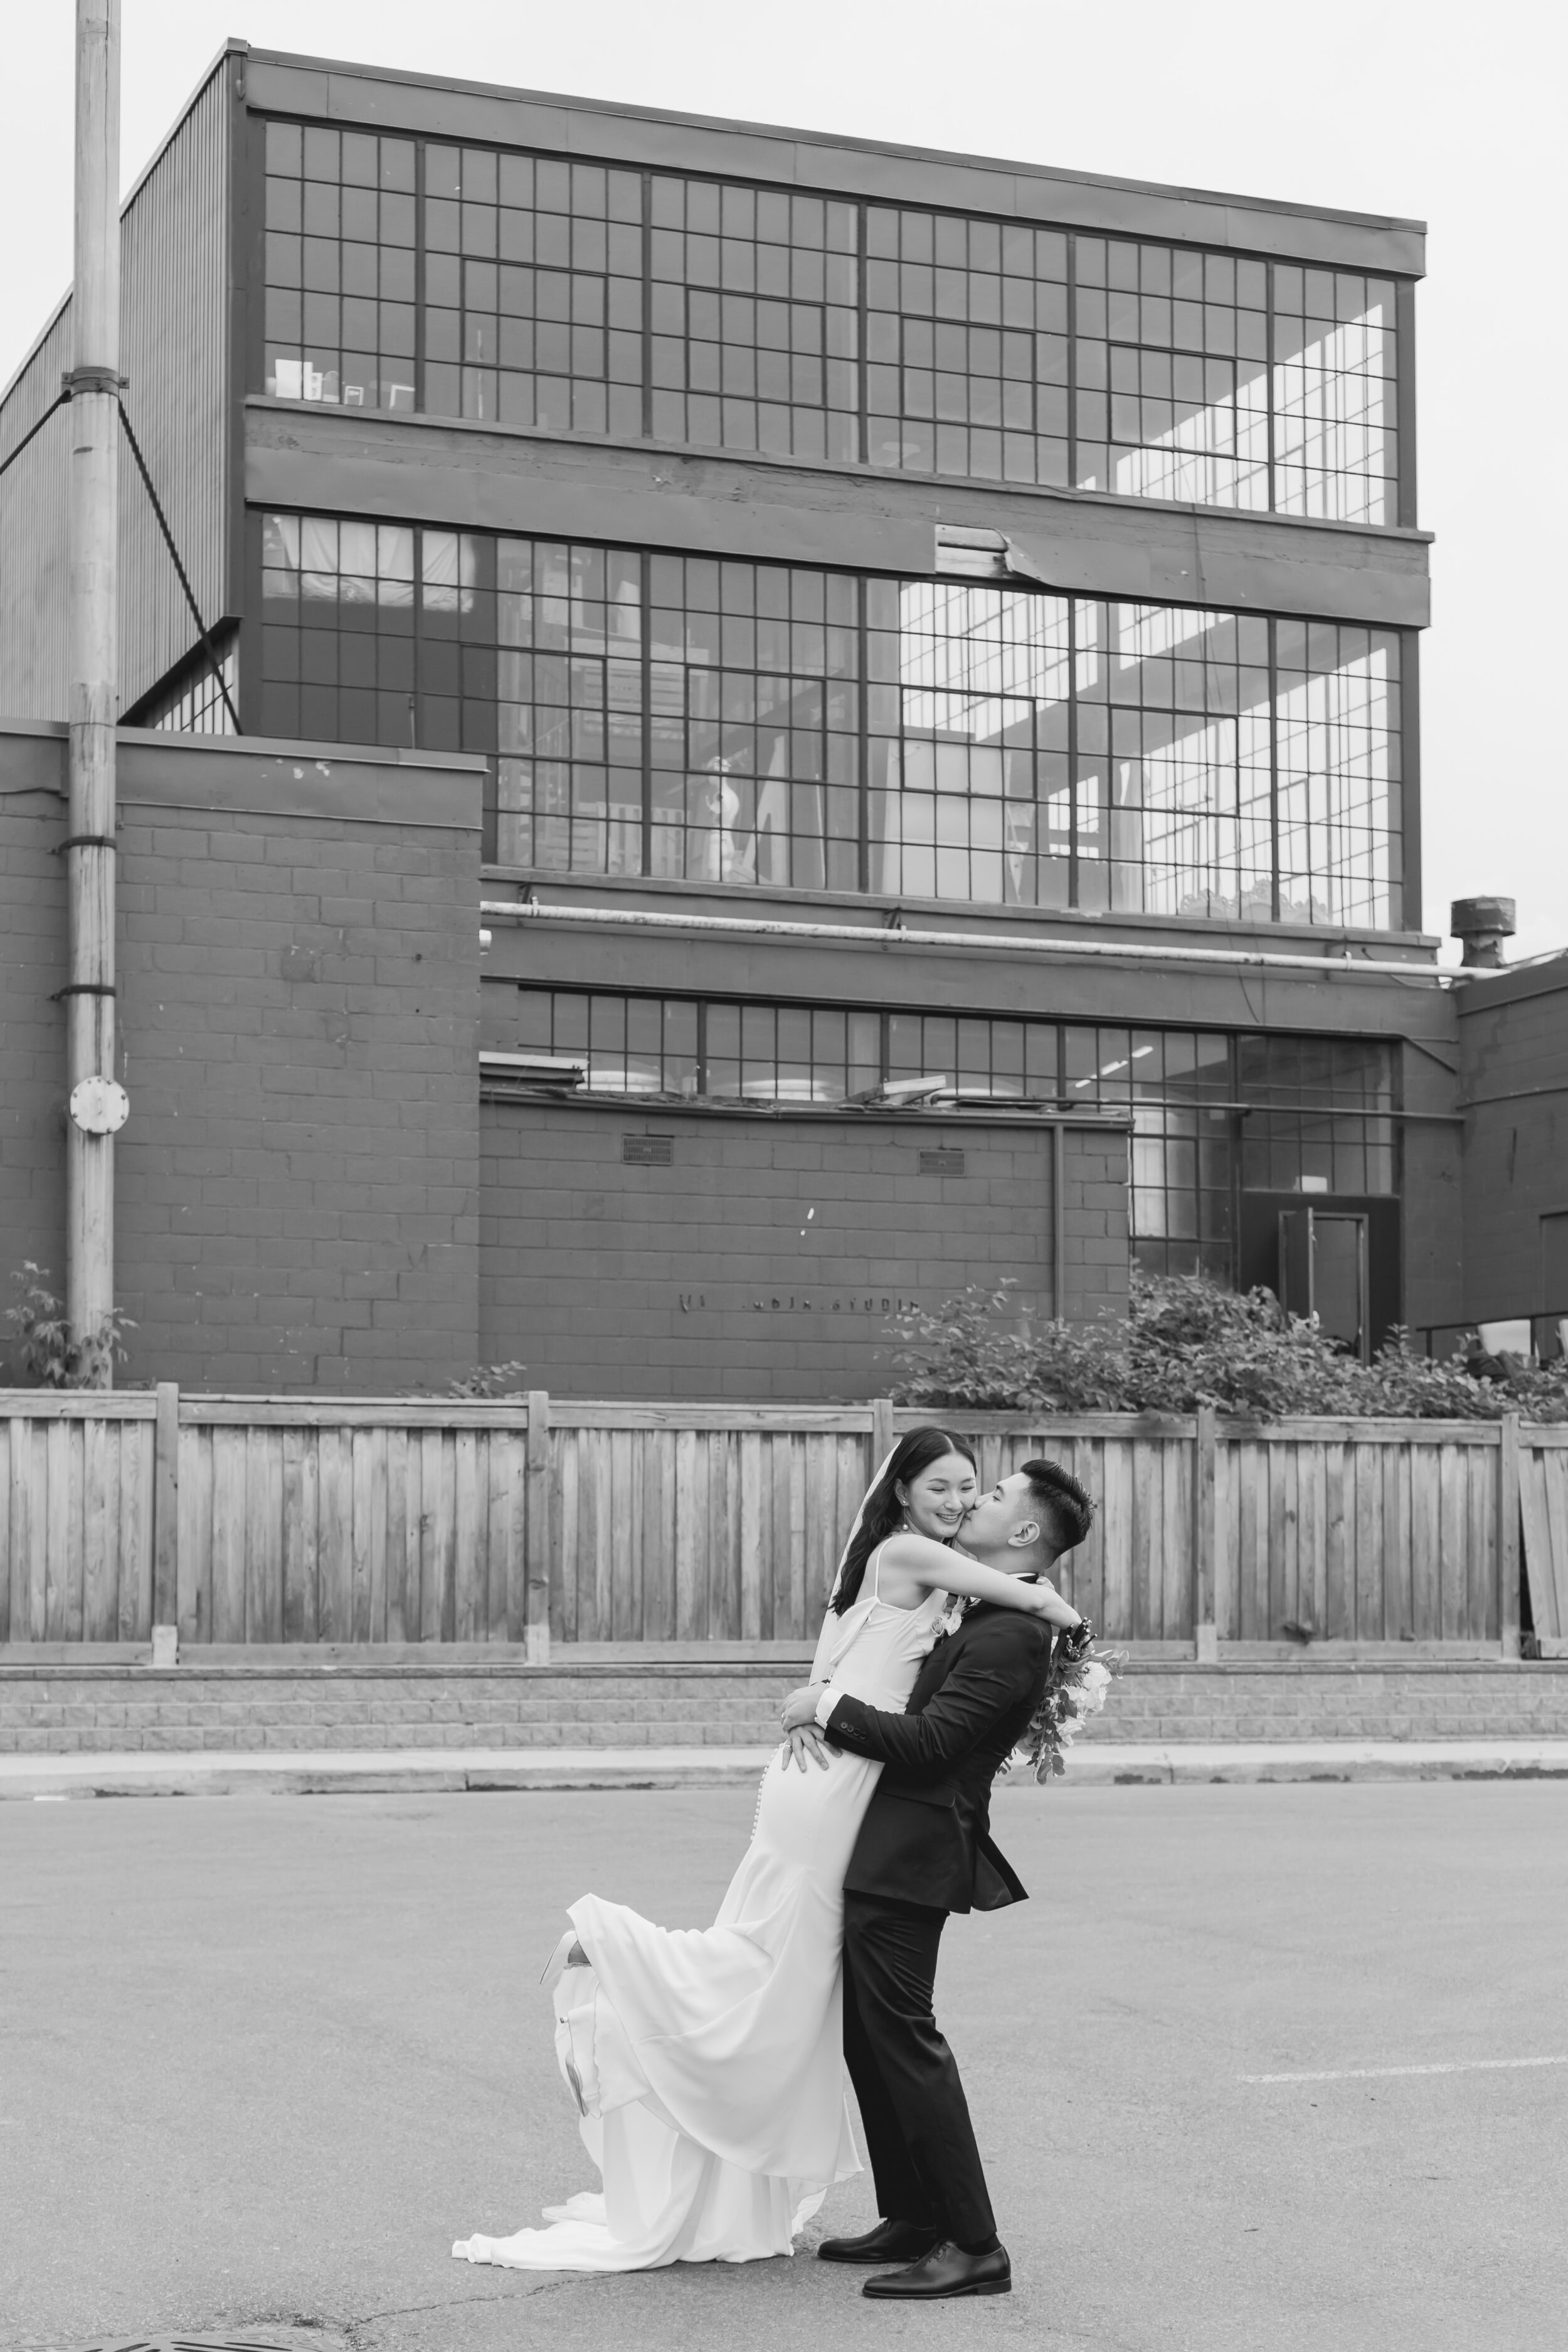 A couple celebrates their elopement in the streets of Toronto near a historic brick building.